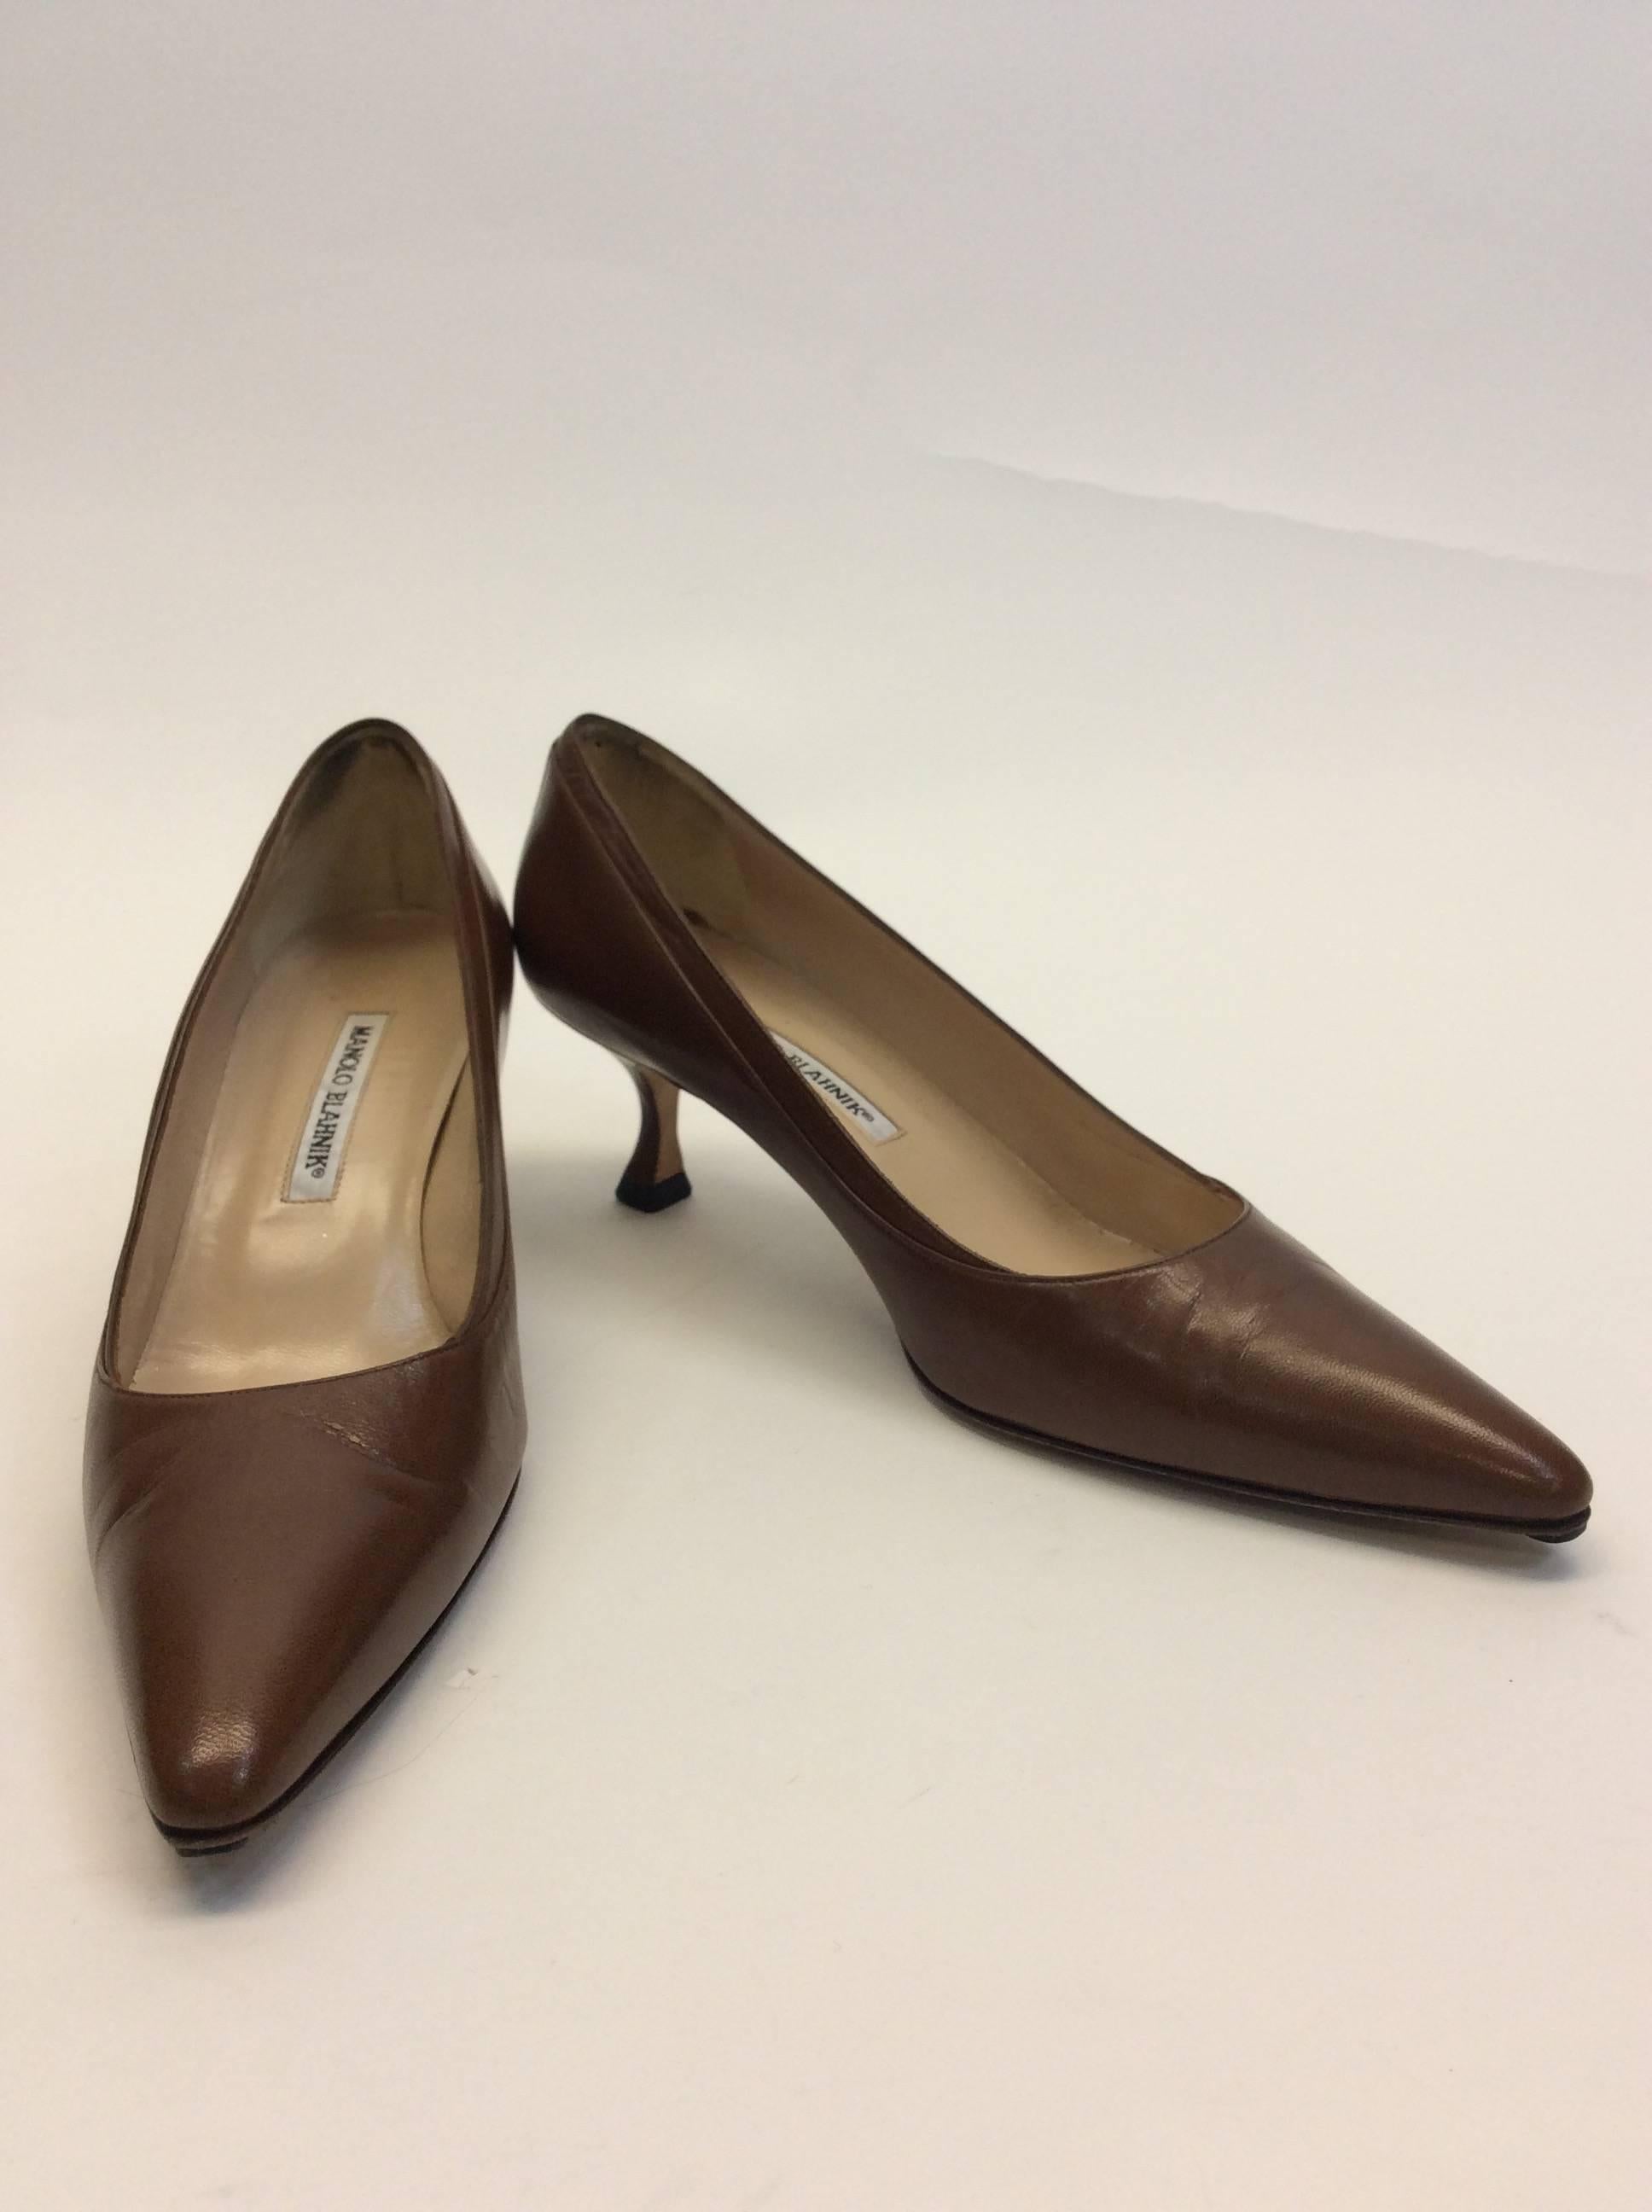 Mocha Leather Exterior 
Pointed Toe
Minor Wear to bottom of Sole consistent with Wear 
Light Beige Leather Interior
3.5“ Inch Sole
2.75“ Inch Heel